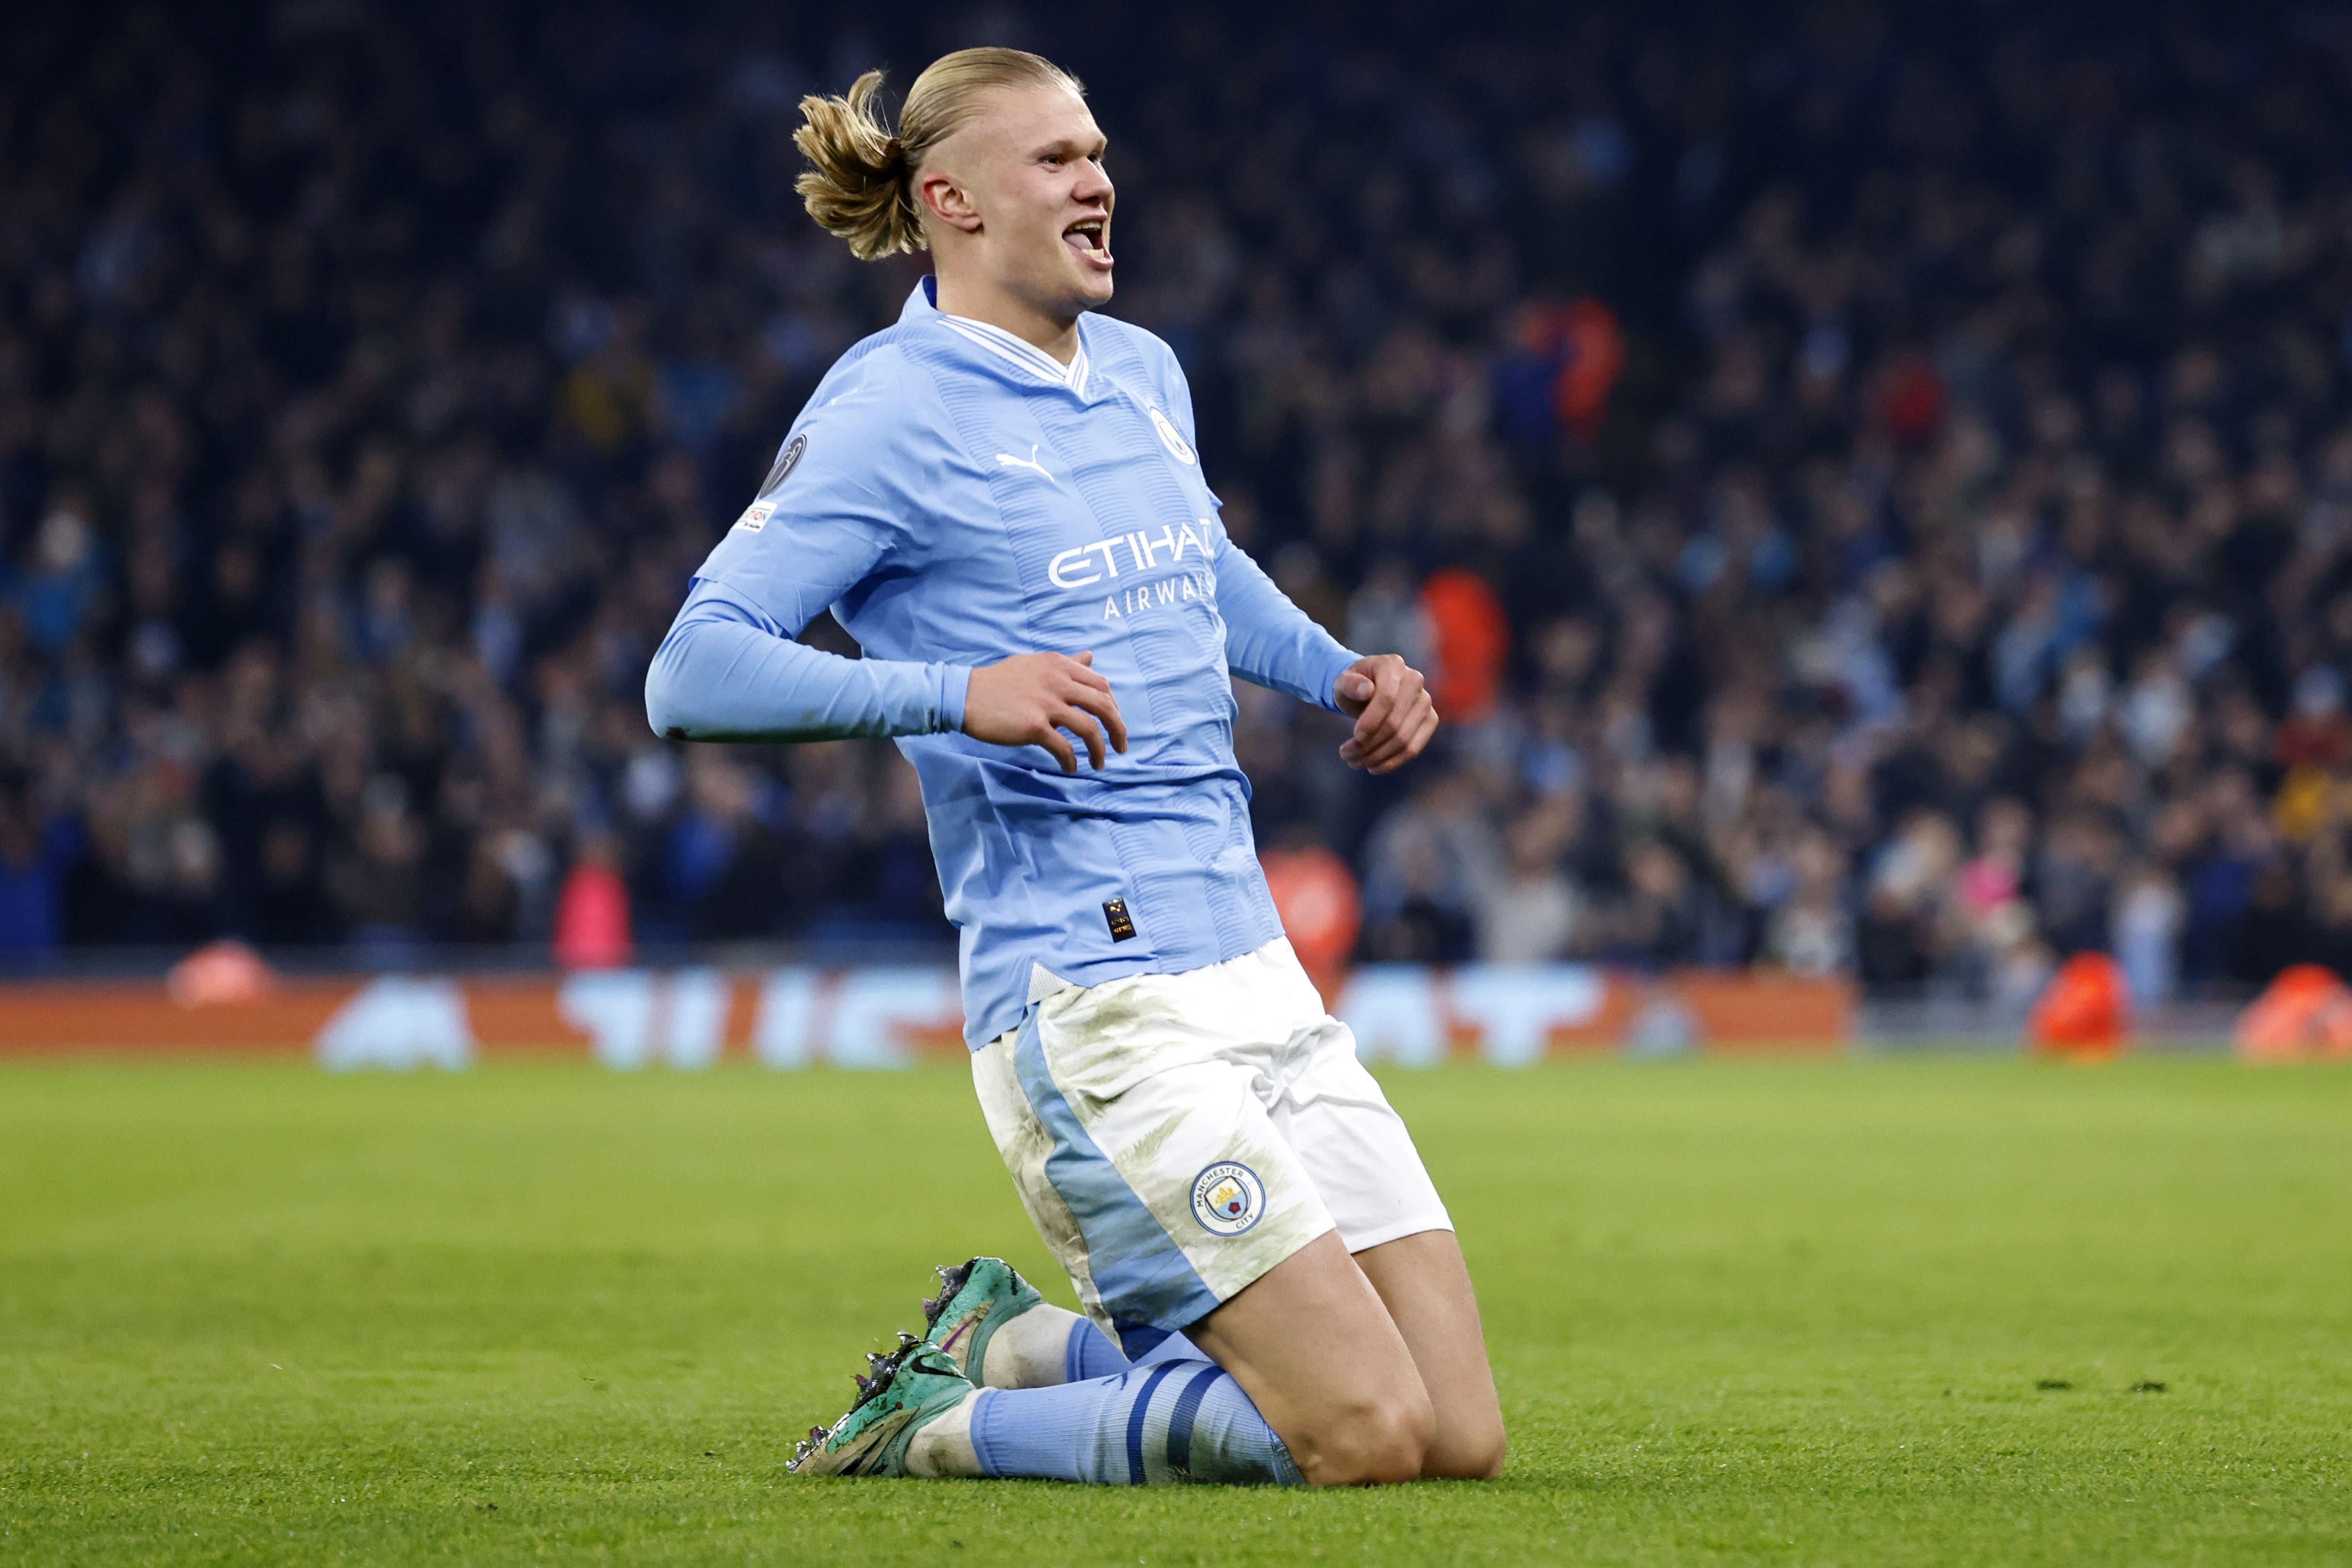 Erling Haaland scored twice for City